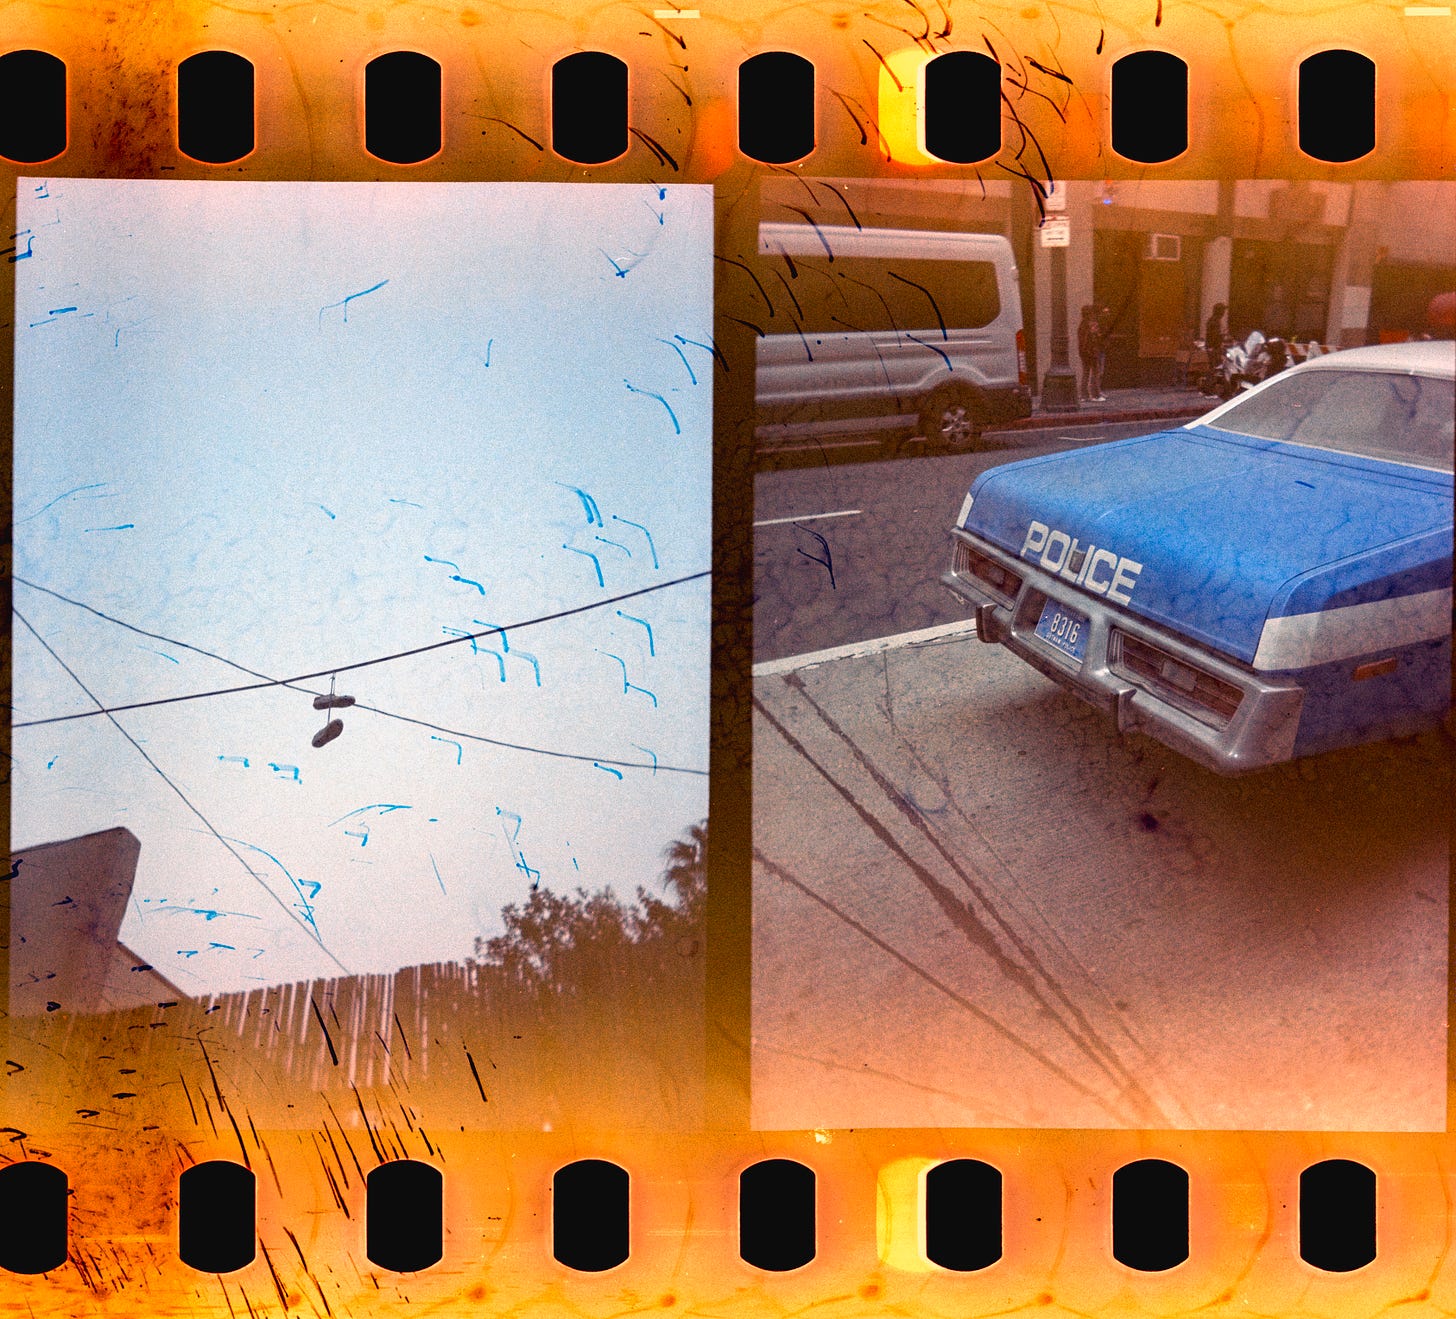 Image on left features two sneakers hanging from telephone wires. Image on right is of a vintage-looking police car from a movie set.